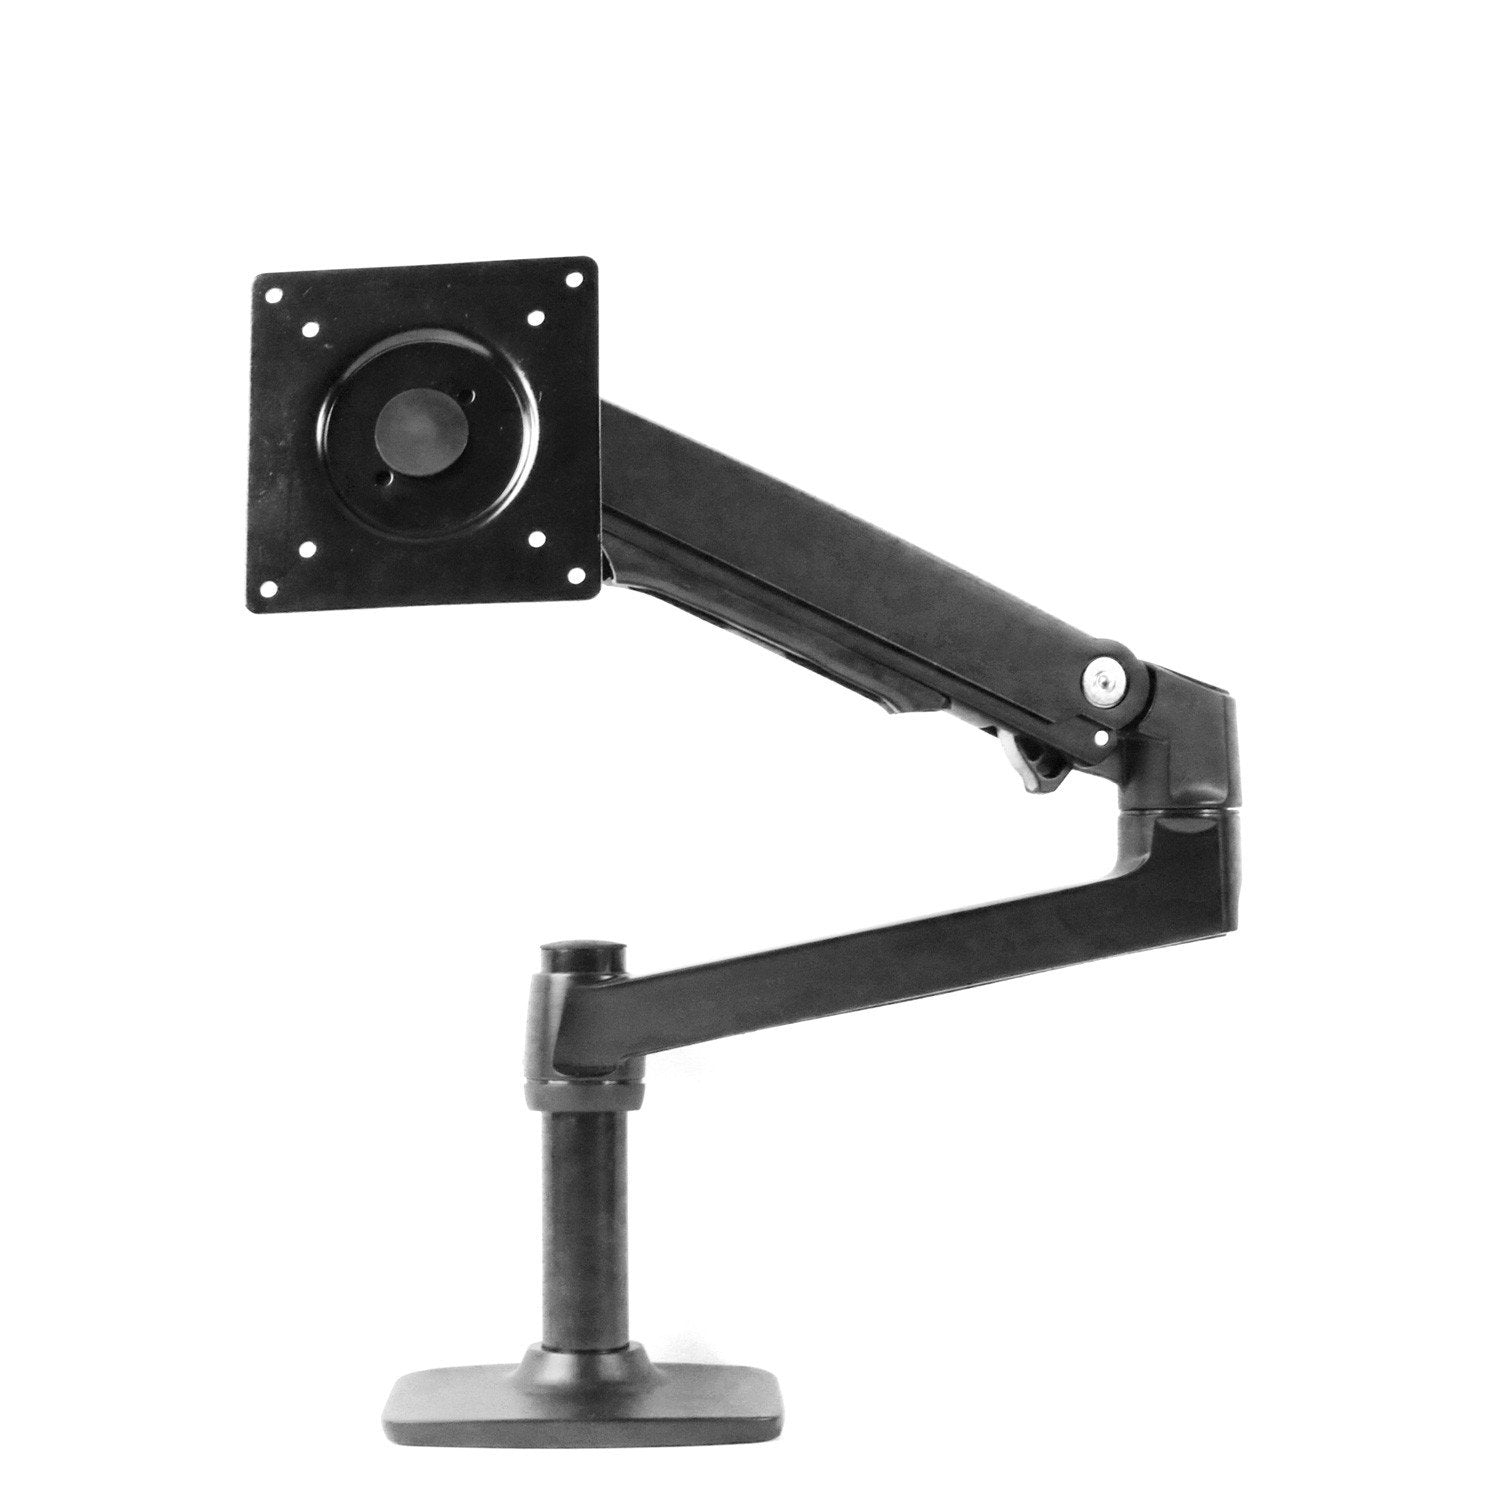 New monitor stands added to the web-store